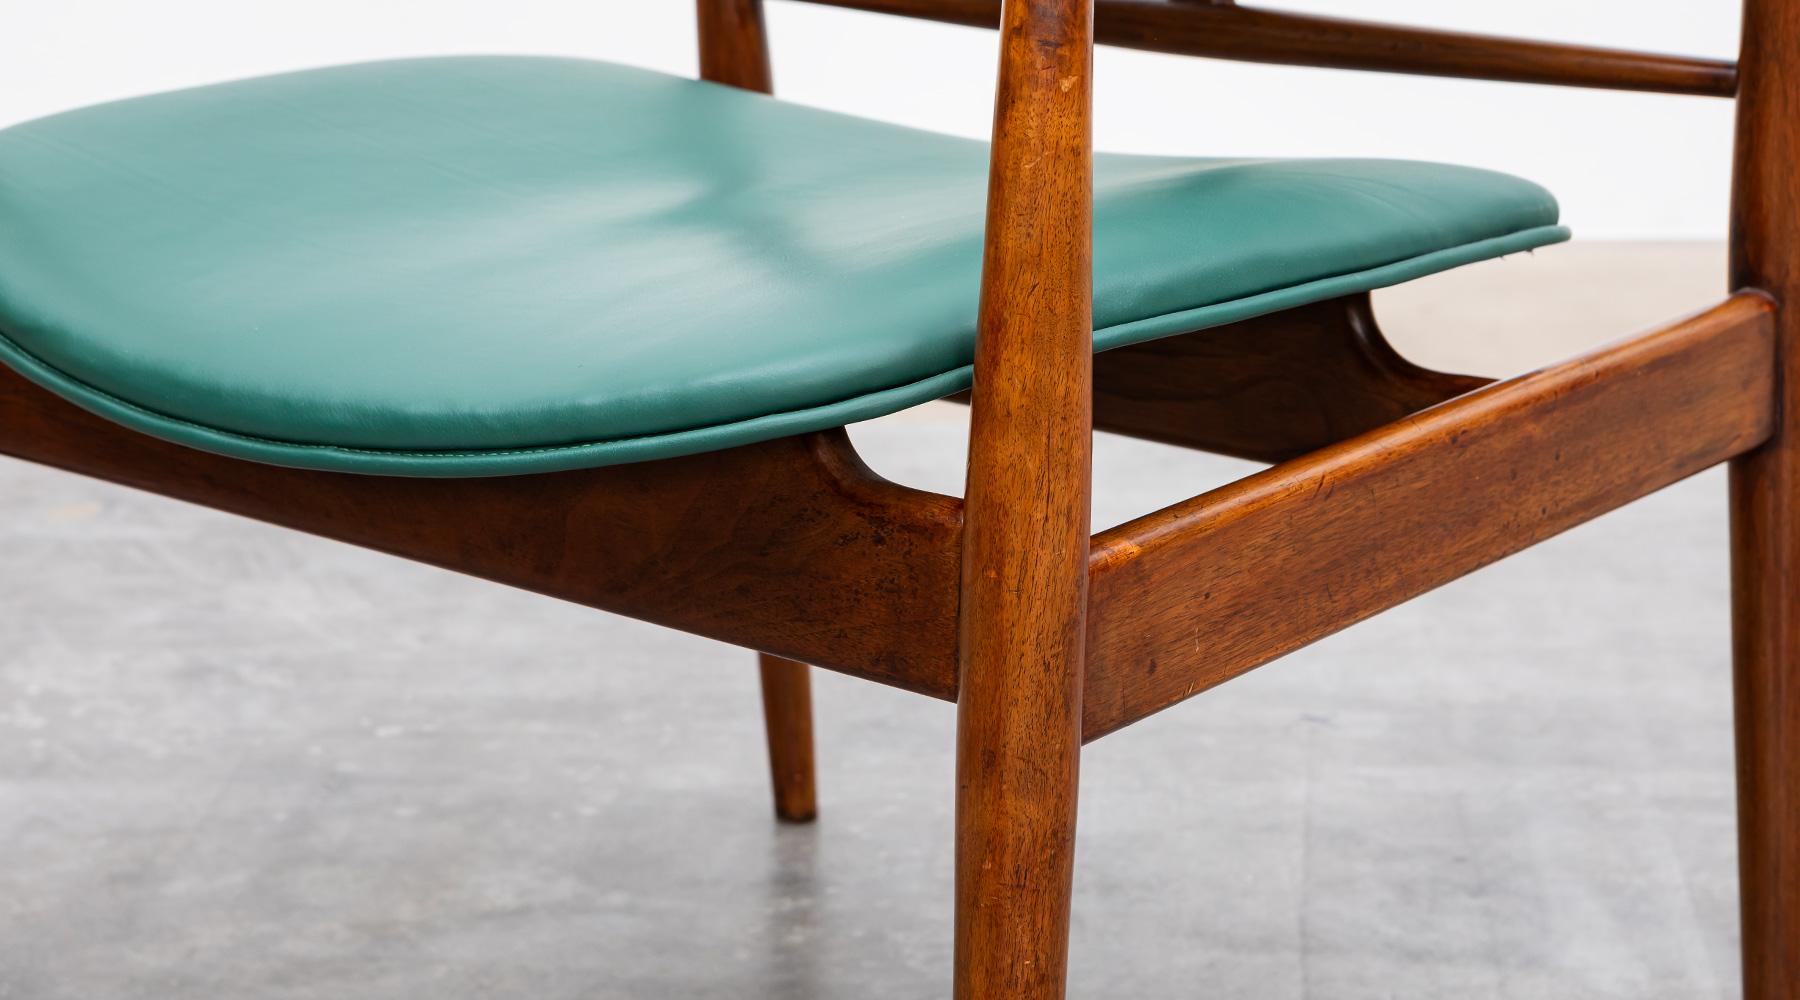 1950s Teak and green faux leather Chair by Finn Juhl For Sale 10